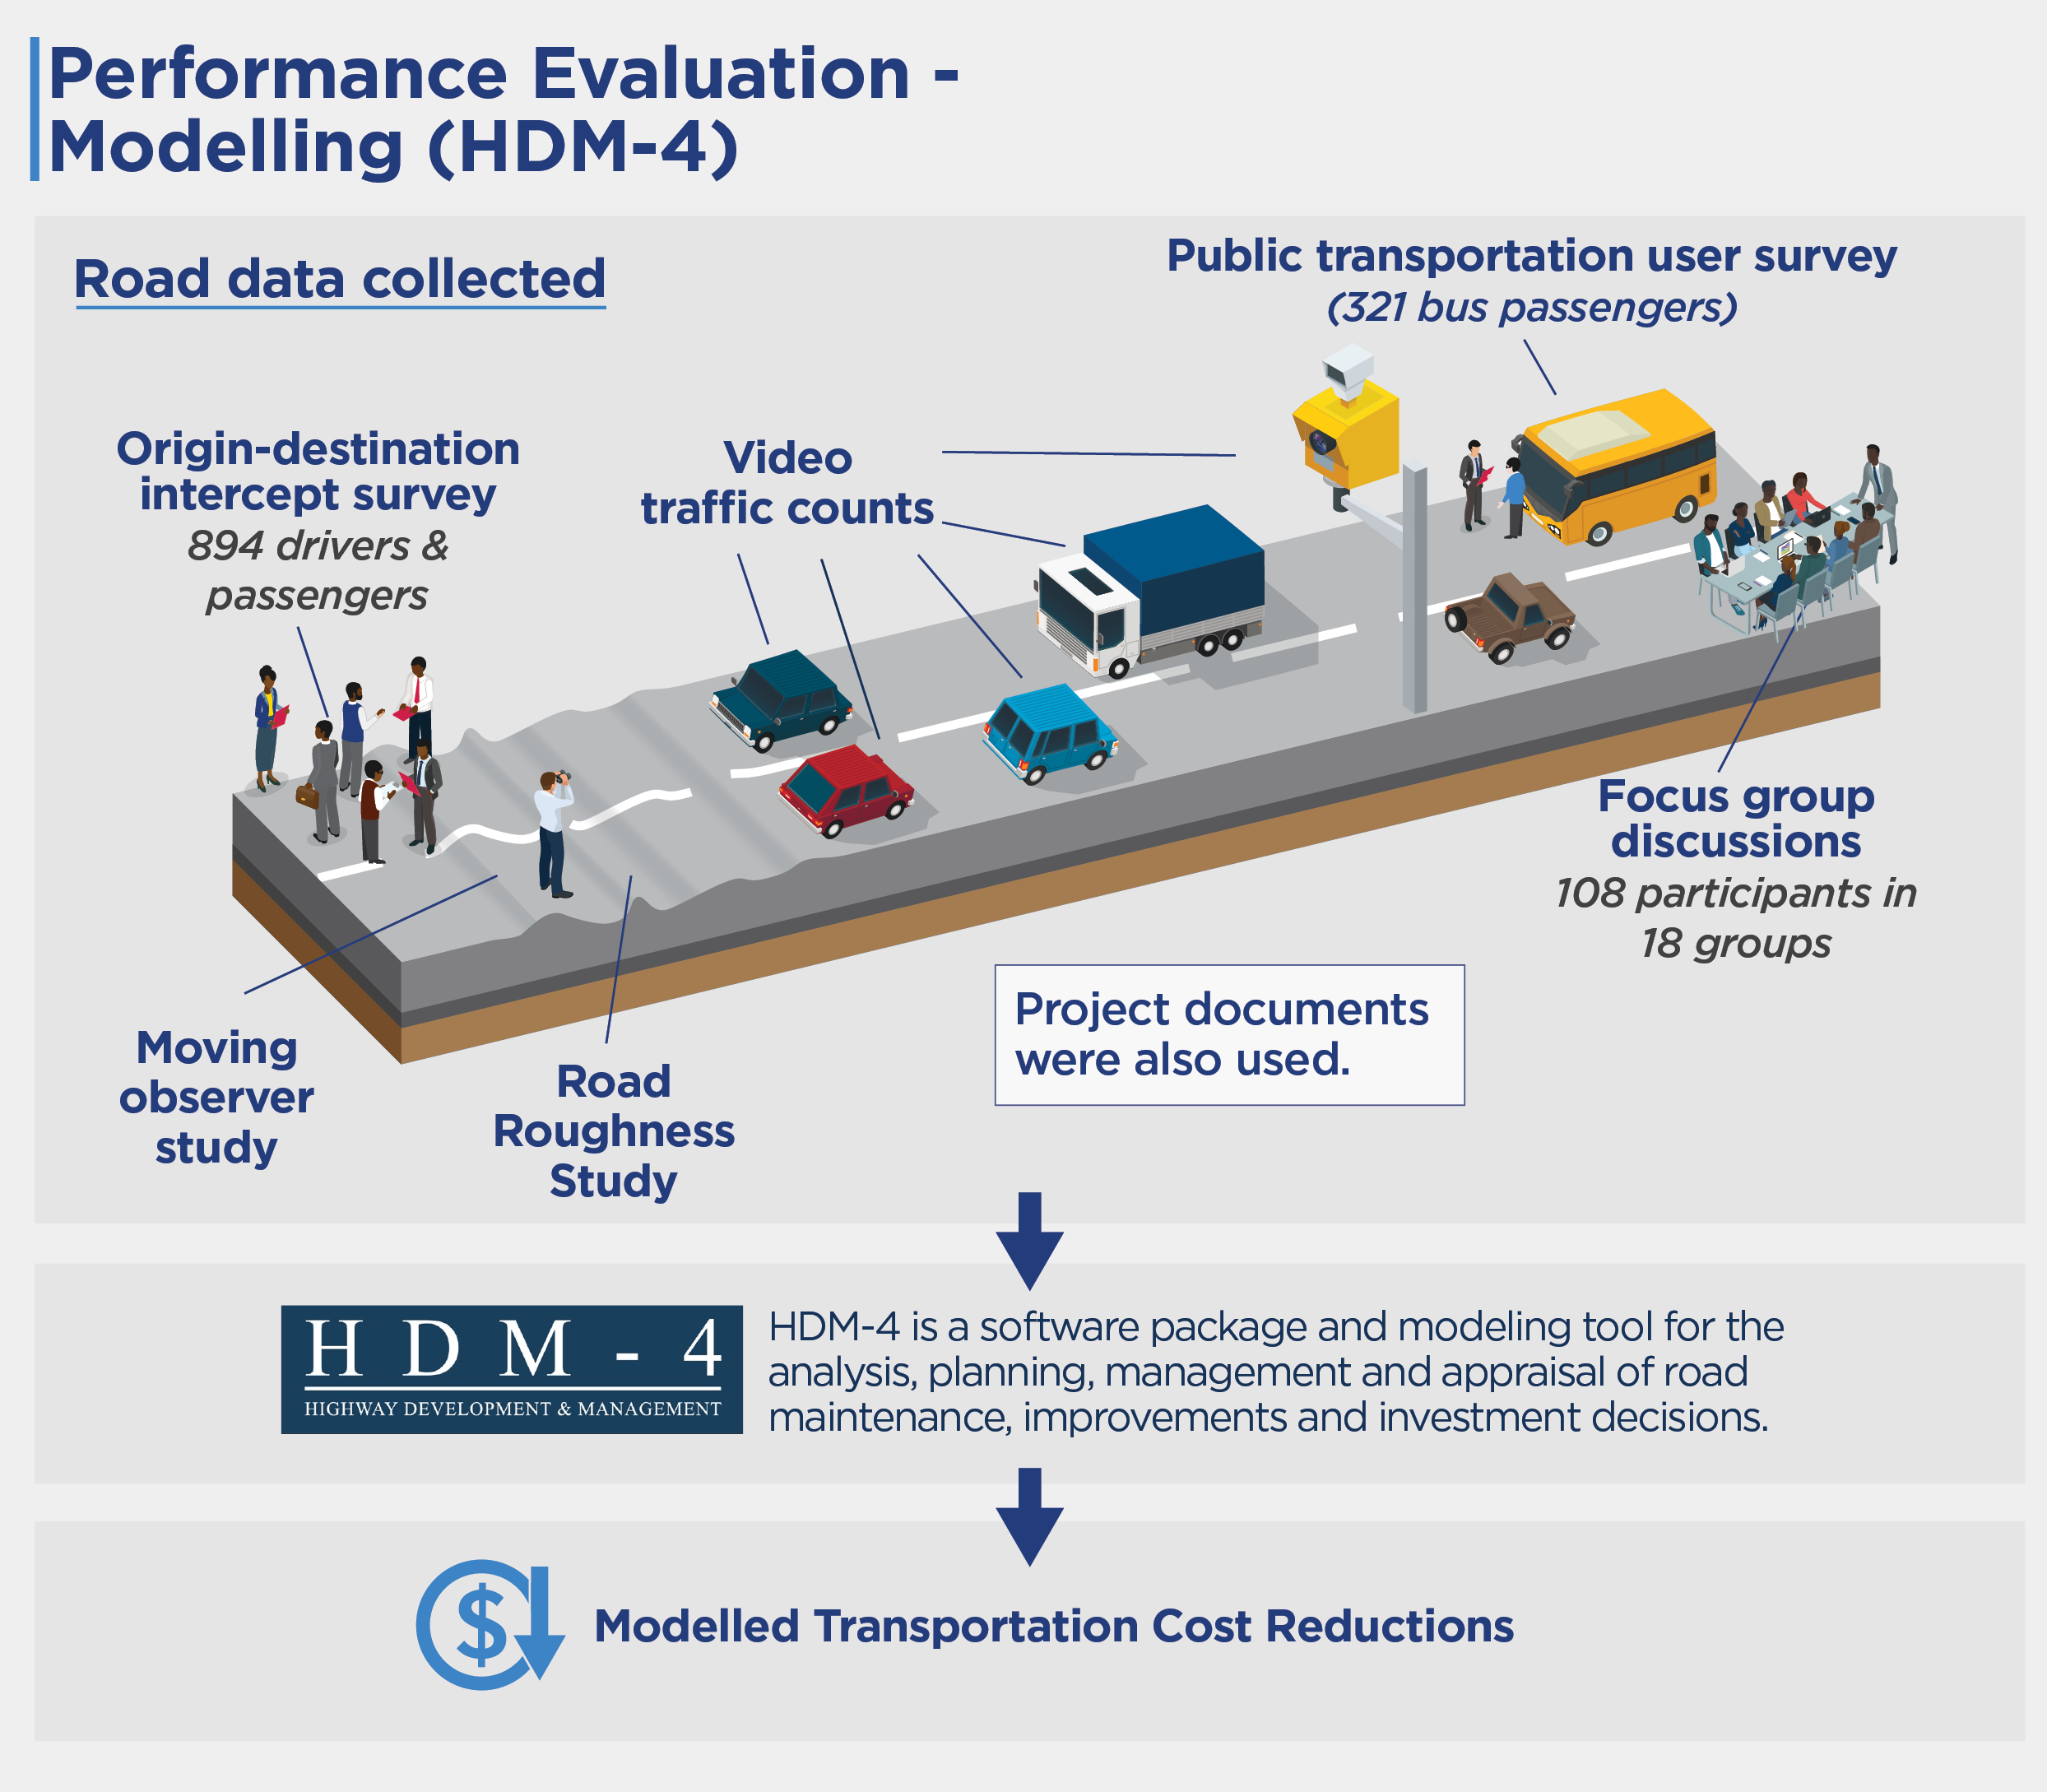 This evaluation used HDM-4 modeling. The road data collected included an origin-destination intercept survey of 894 drivers and passengers; a moving observer study; video traffic counts; public a transportation user survey of 321 bus passengers, and focus group discussions of 108 participants in 18 groups. Project documents were also used. This data was analyzed in HDM-4 software, used to analyze, plan, manage and appraise road maintenance, improvements and investment decisions, resulting in modeled transporation cost reductions.